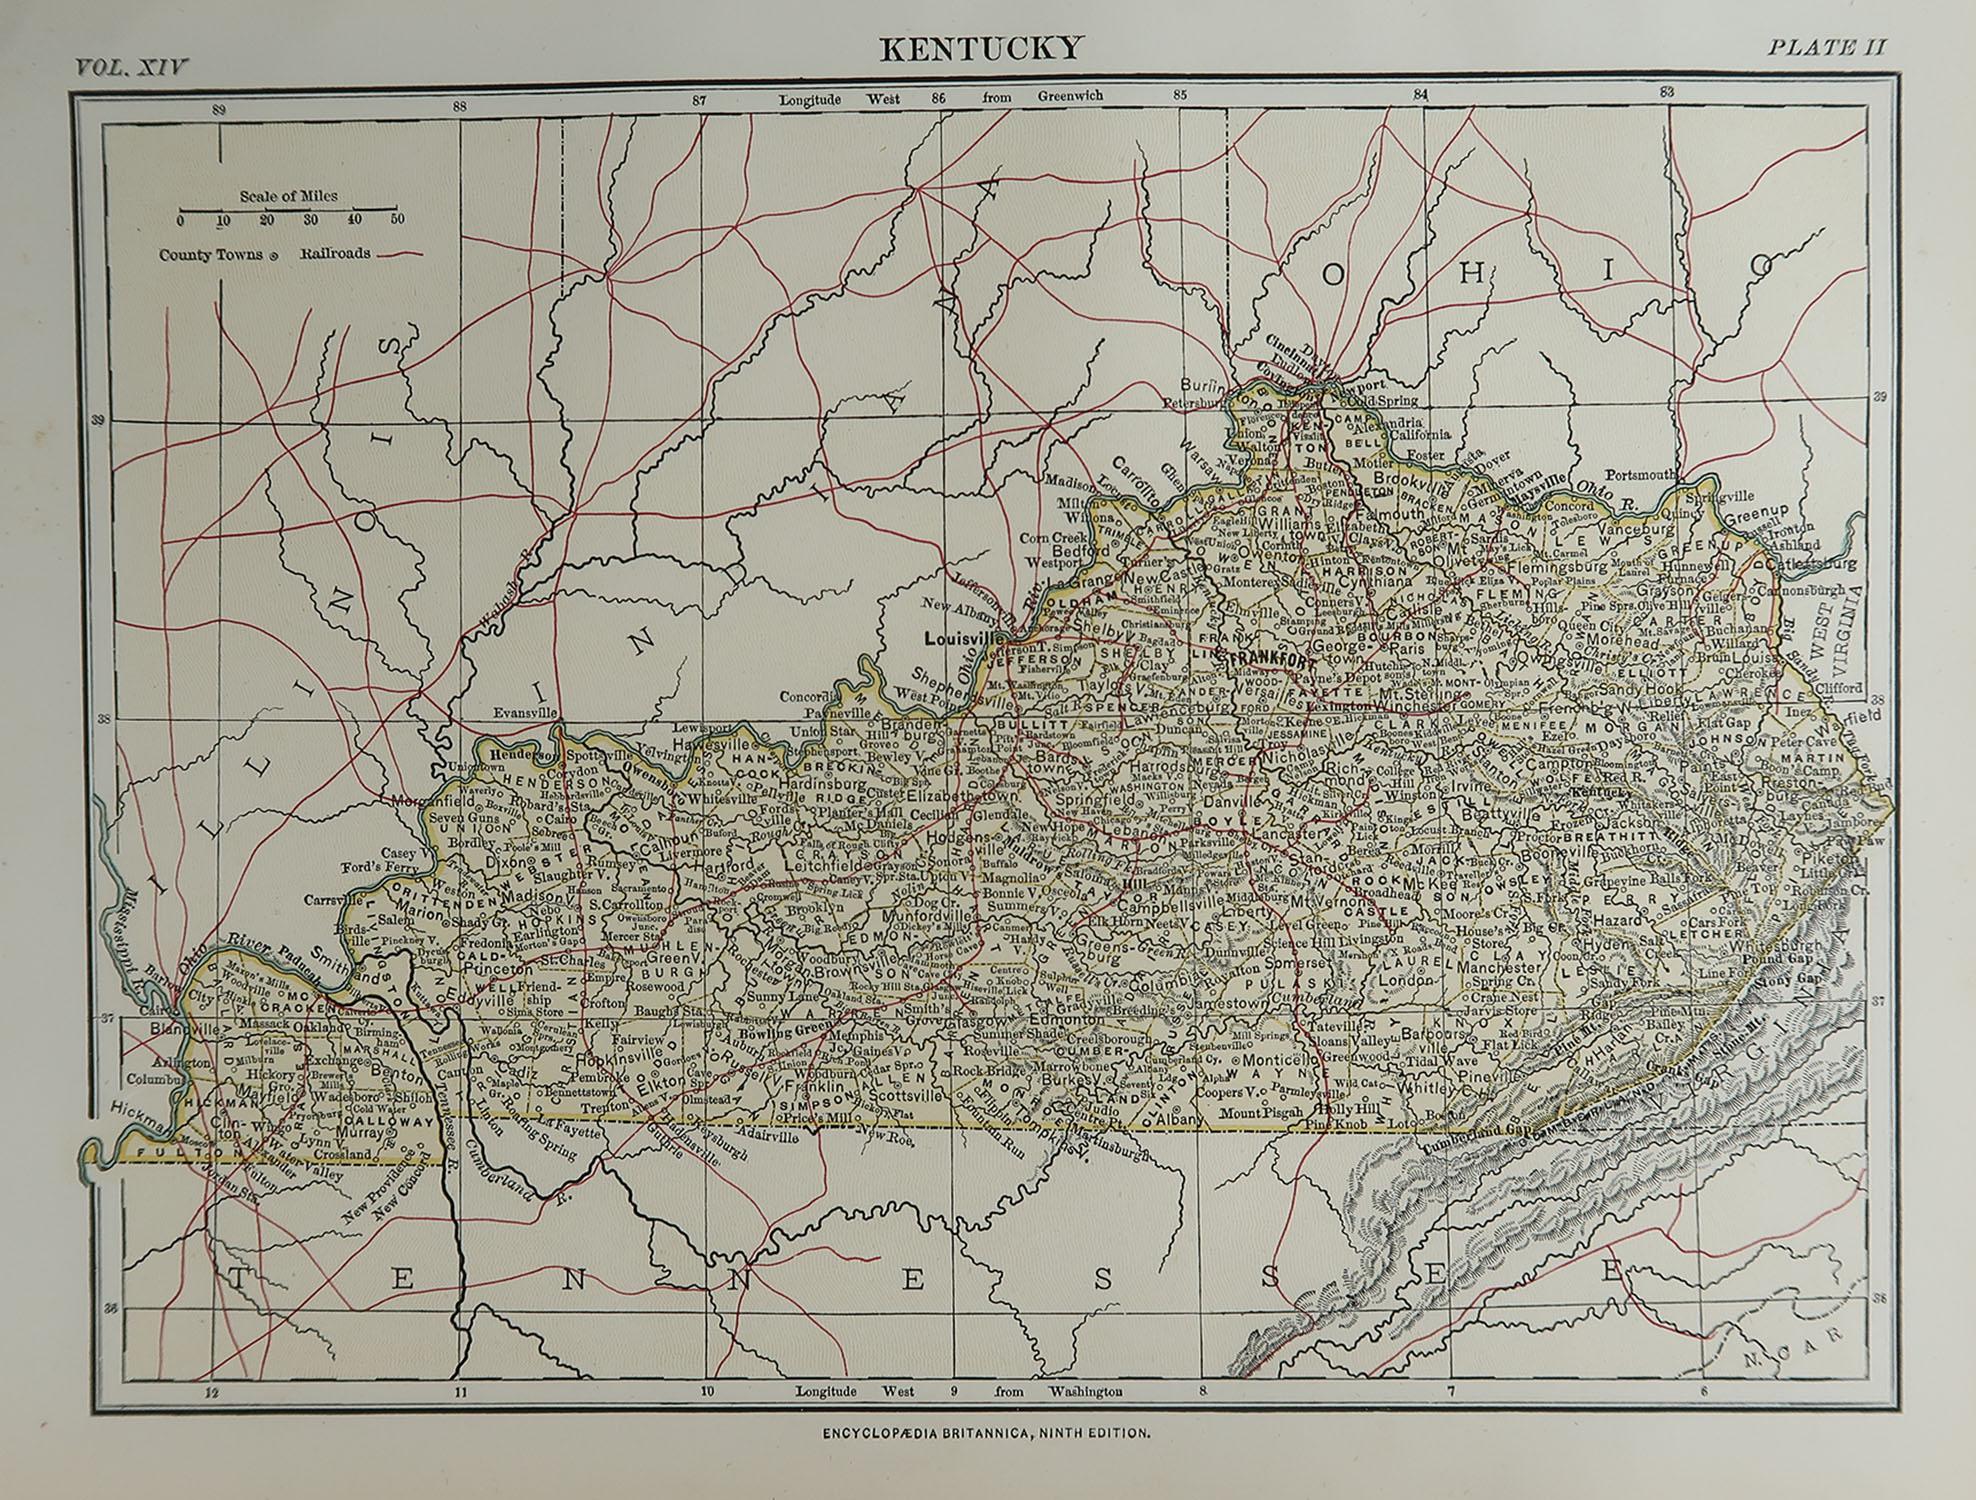 Great map of Kentucky

Drawn and engraved by W. & A.K. Johnston

Published By A & C Black, Edinburgh.

Original colour

Unframed.








 